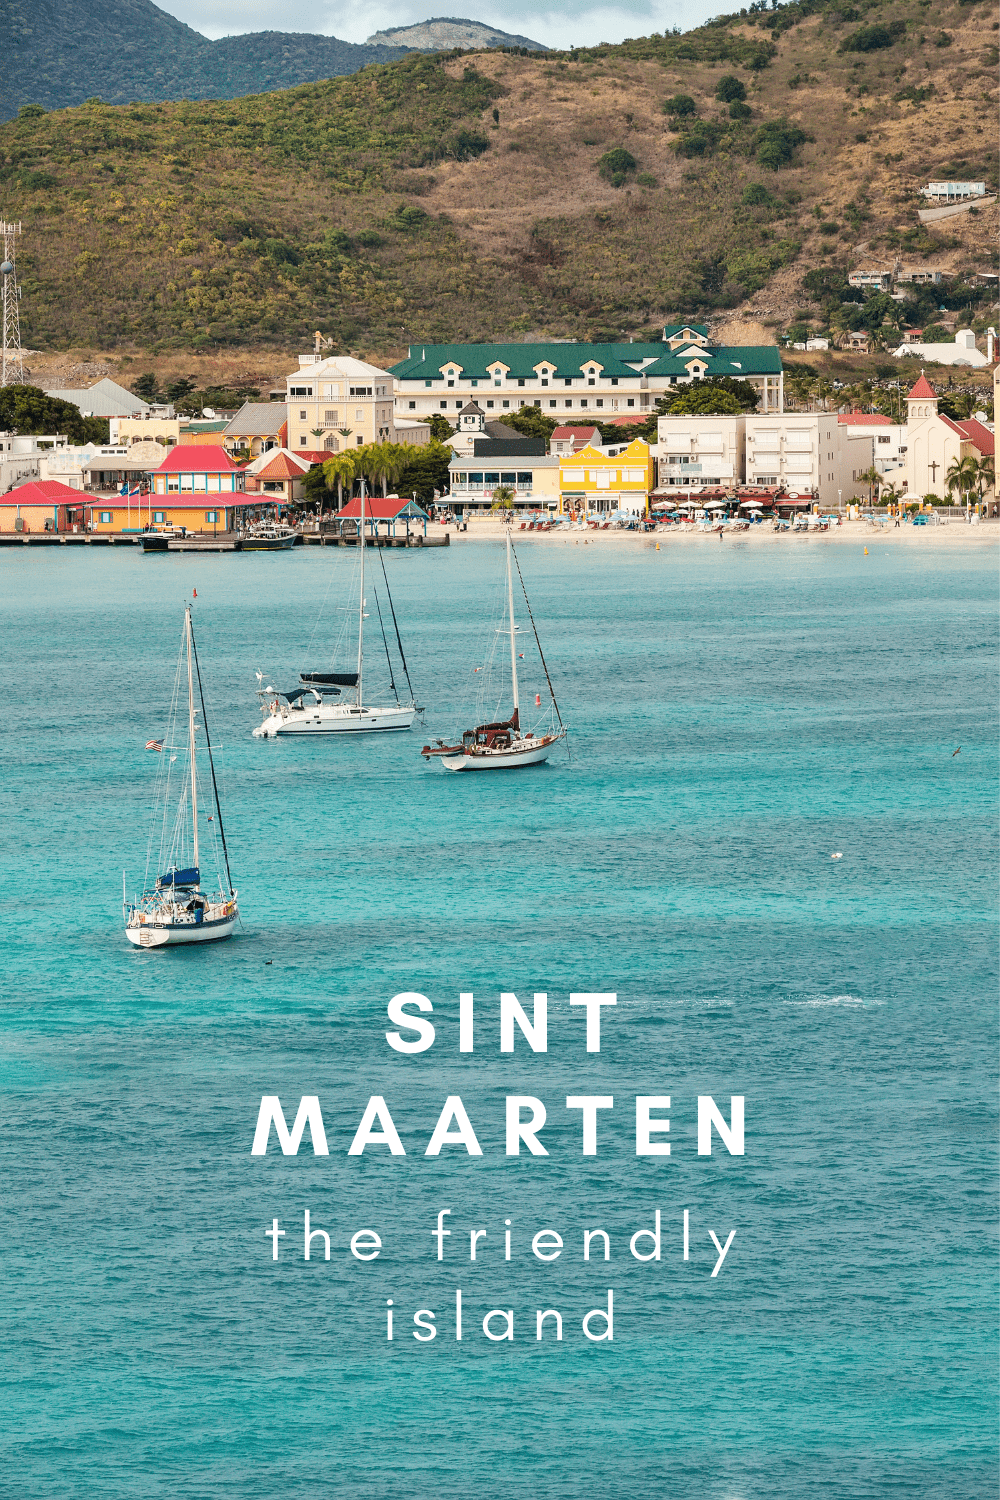 Sailboats at anchor at St. Maarten island, with small town and hill in background.. Text overlay says "sint maarten the friendly island." st martin island, saint martin island, things to do in st maarten, st martin caribbean, st martin island caribbean. st martin virgin islands, mullet bay, pinel island, st-martin, st. martin island, st. martens